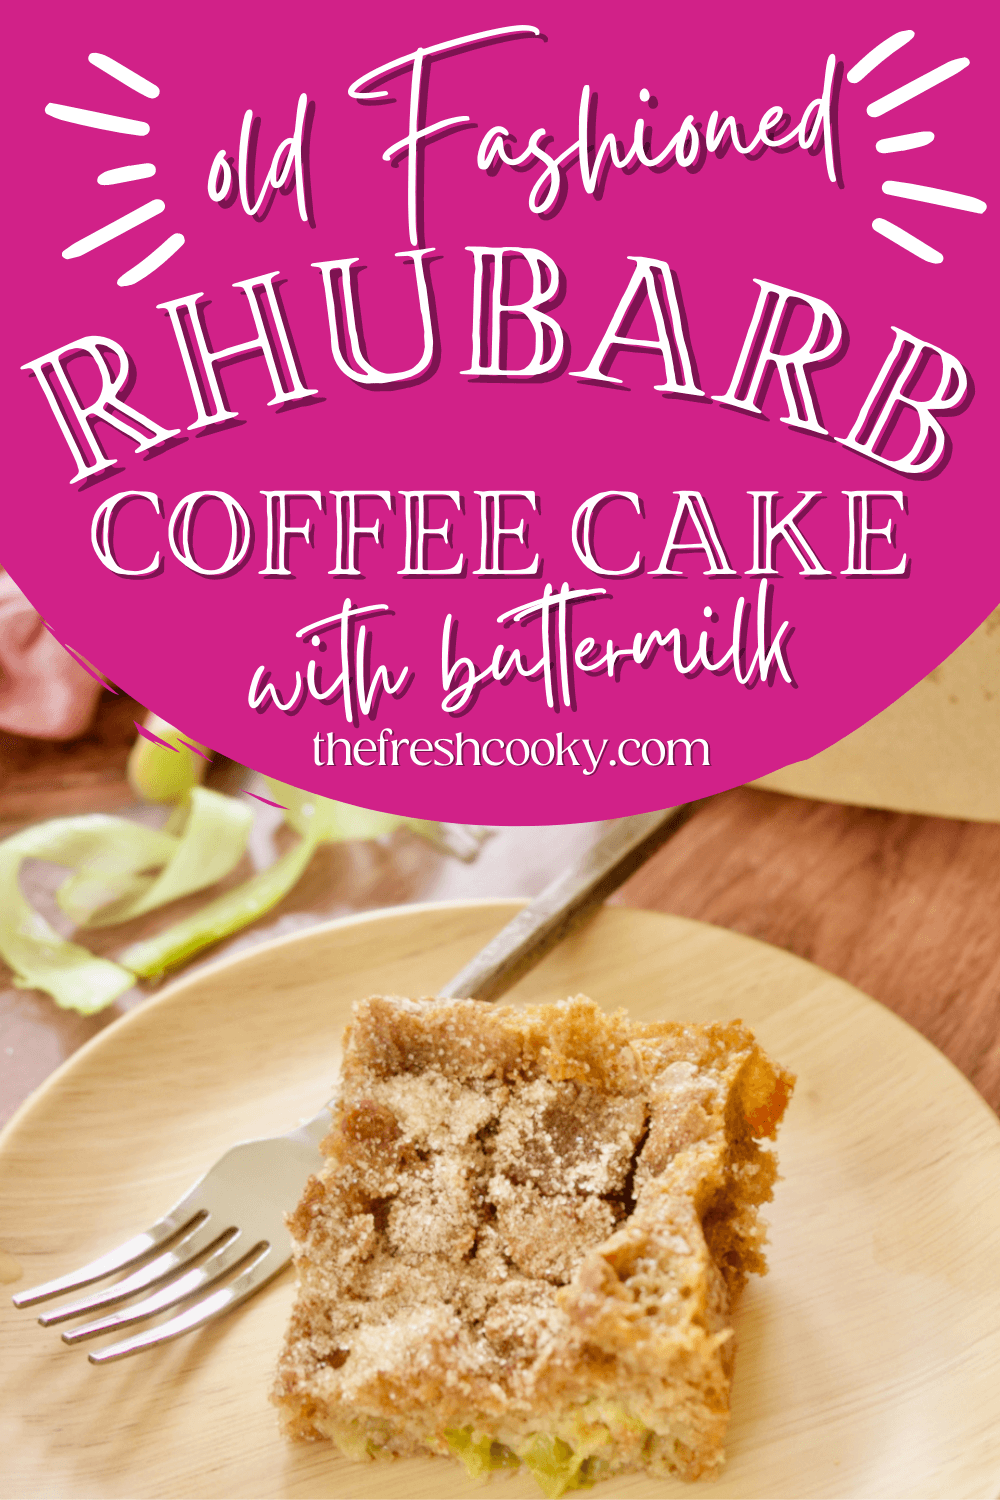 Pin for old fashioned rhubarb coffee cake with slice of rhubarb cake on bamboo plate with rustic fork.